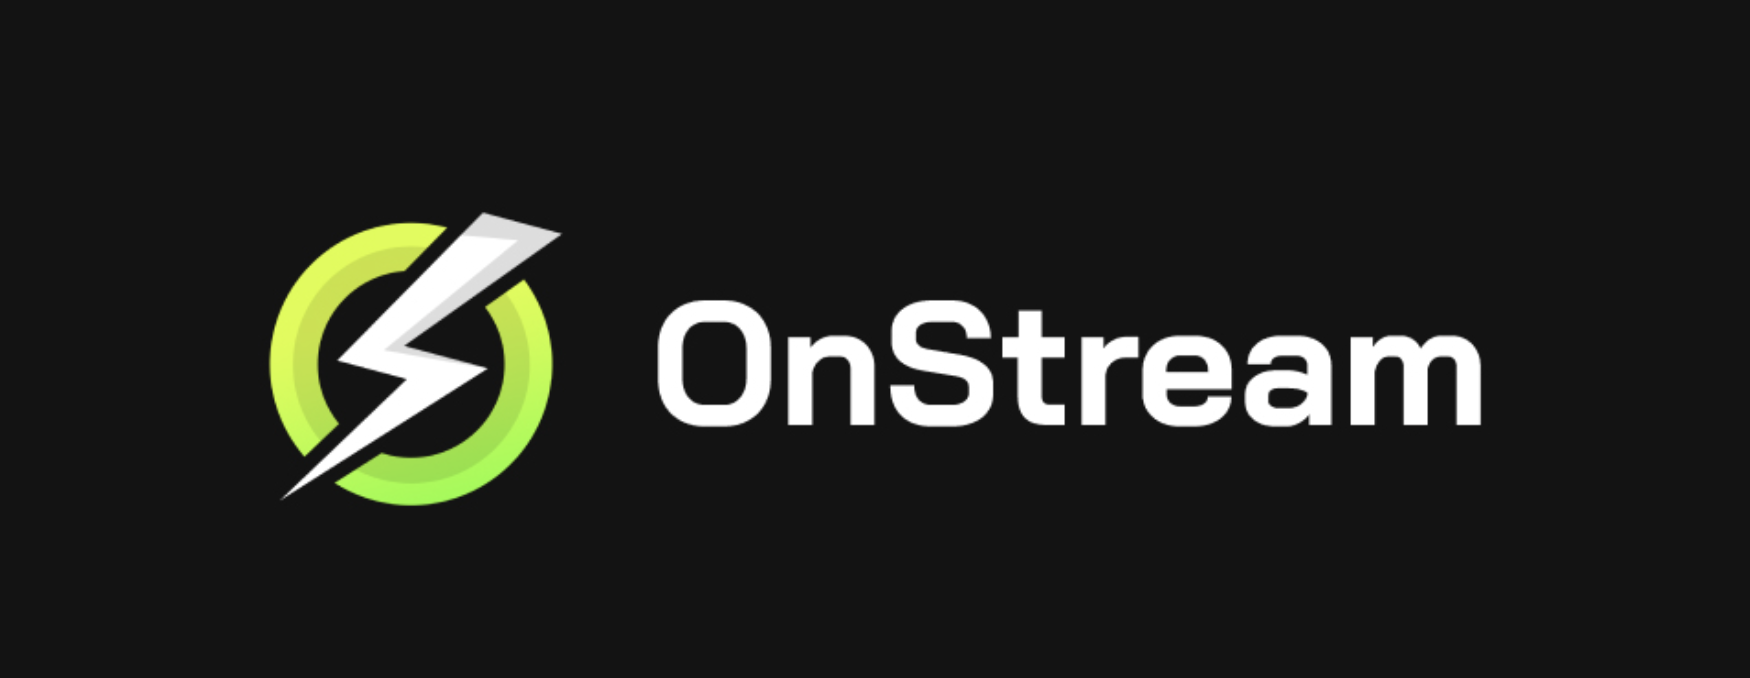 OnStream APK on Android TV Box Free - STEPS